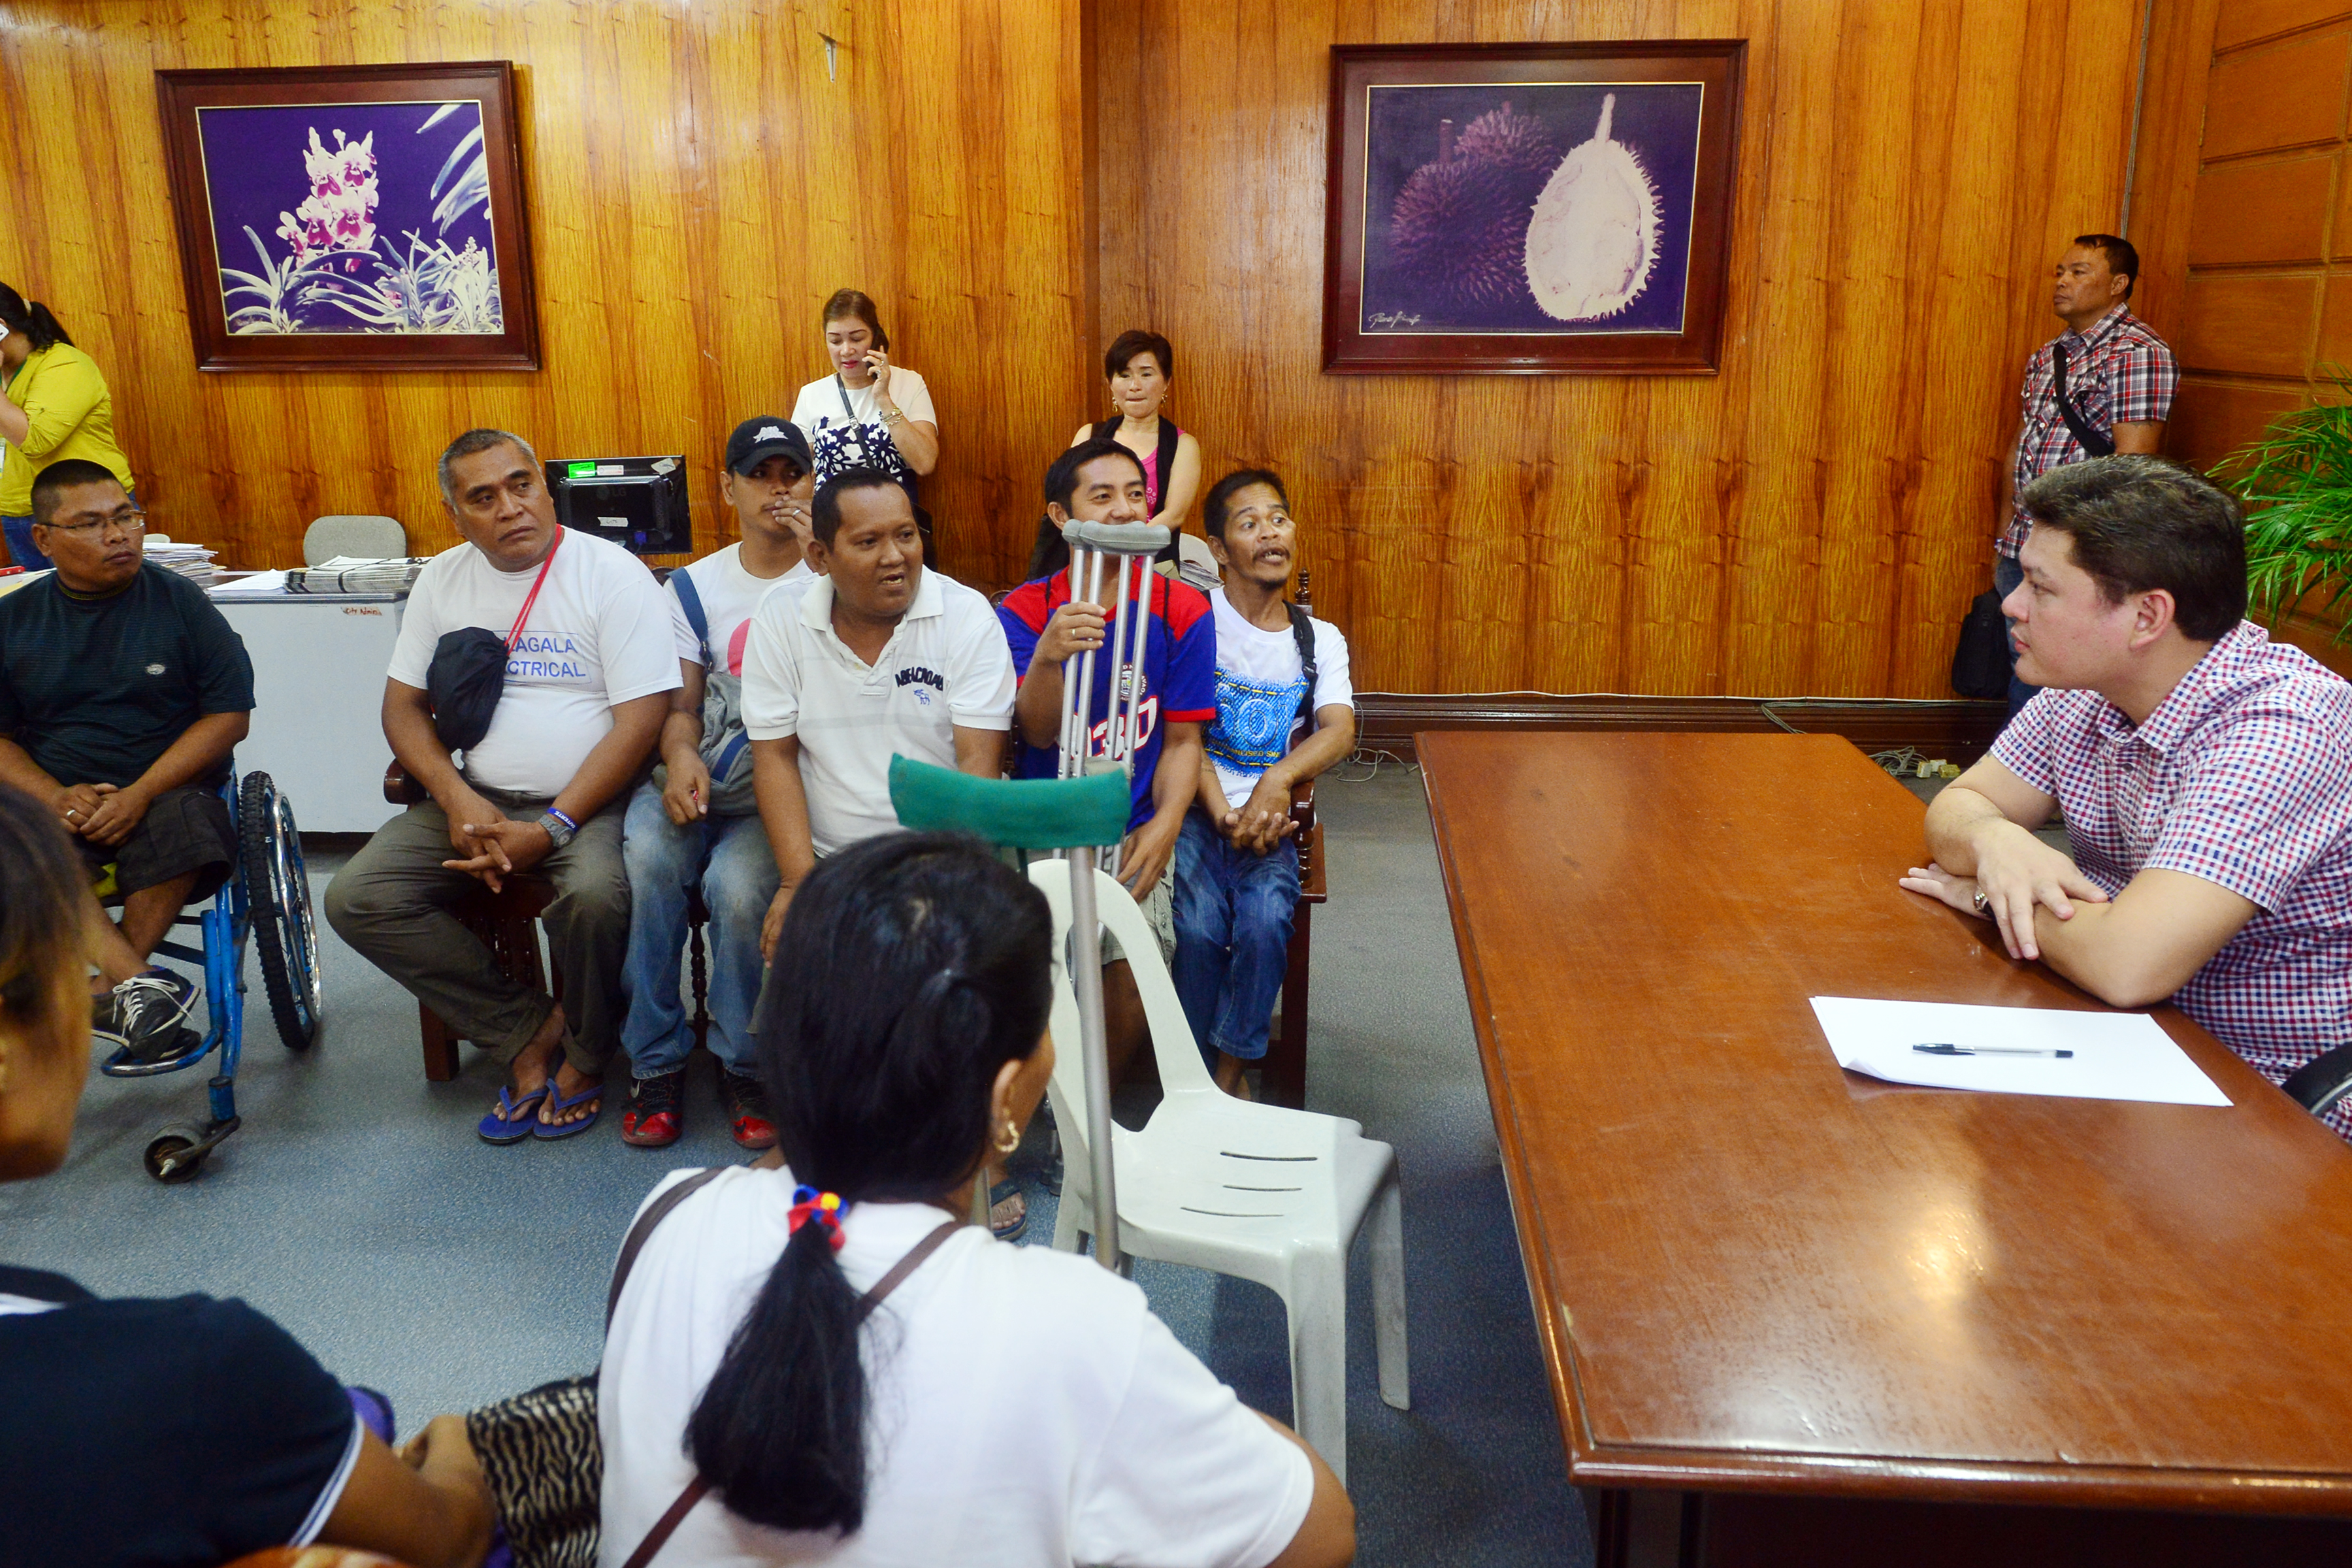 A number of indigents and persons with disabilities talk with Davao City Vice Mayor Paolo Duterte at his office Monday, July 4. Duterte is now the acting mayor as his sister, Mayor Sara Duterte-Carpio is on leave until July 22.  (Photo by Davao City Information Office)